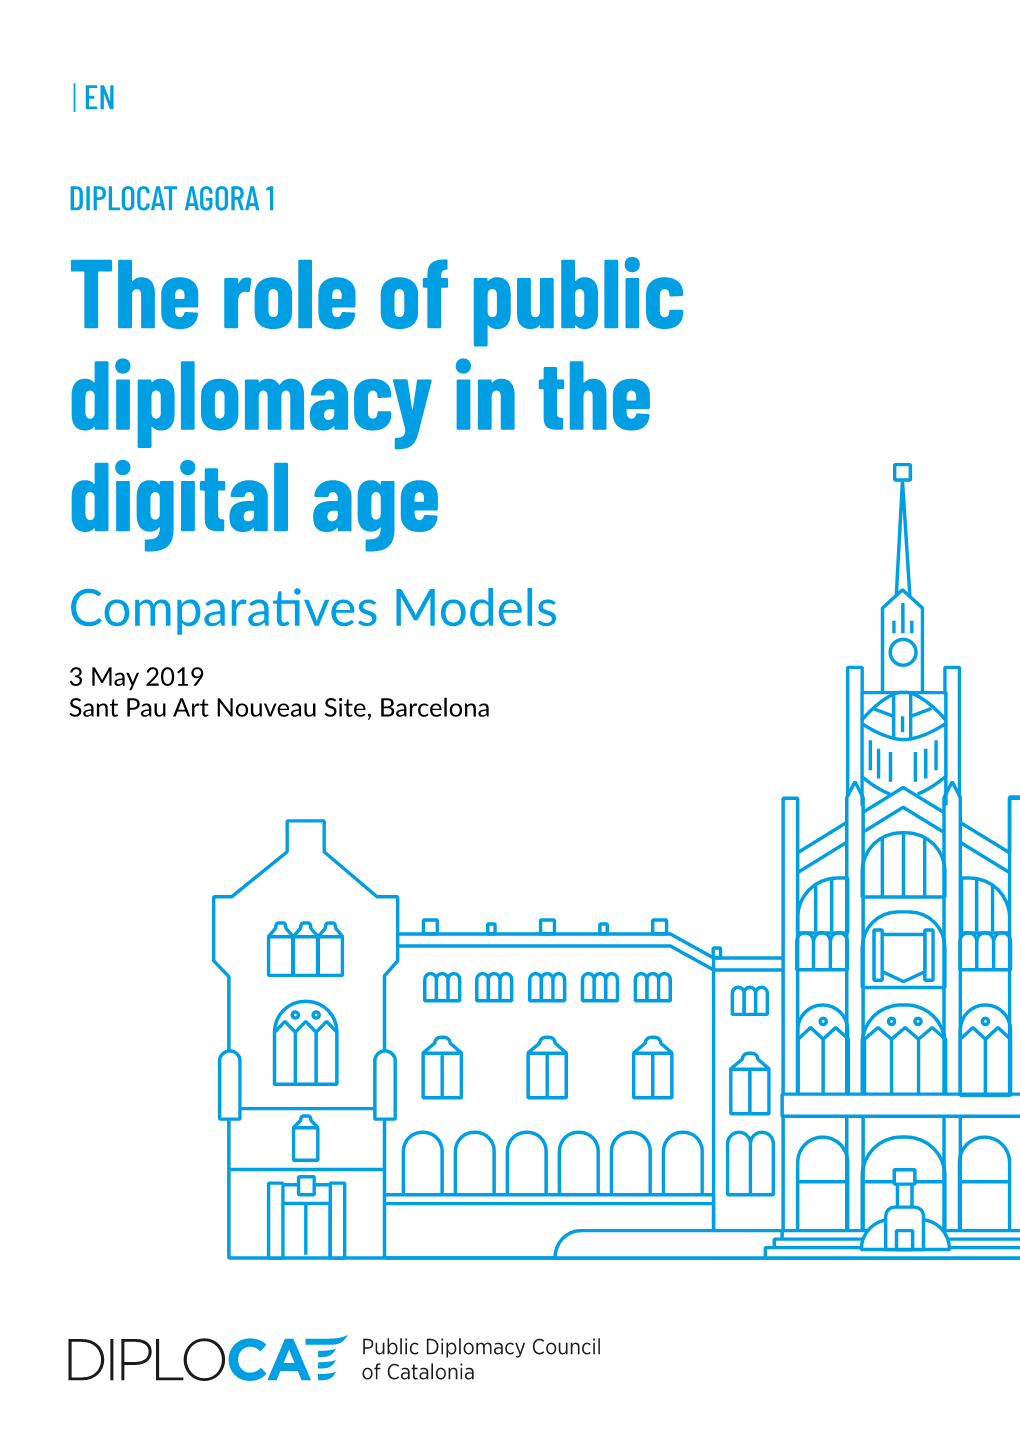 The Role of Public Diplomacy in the Digital Age Comparatives Models